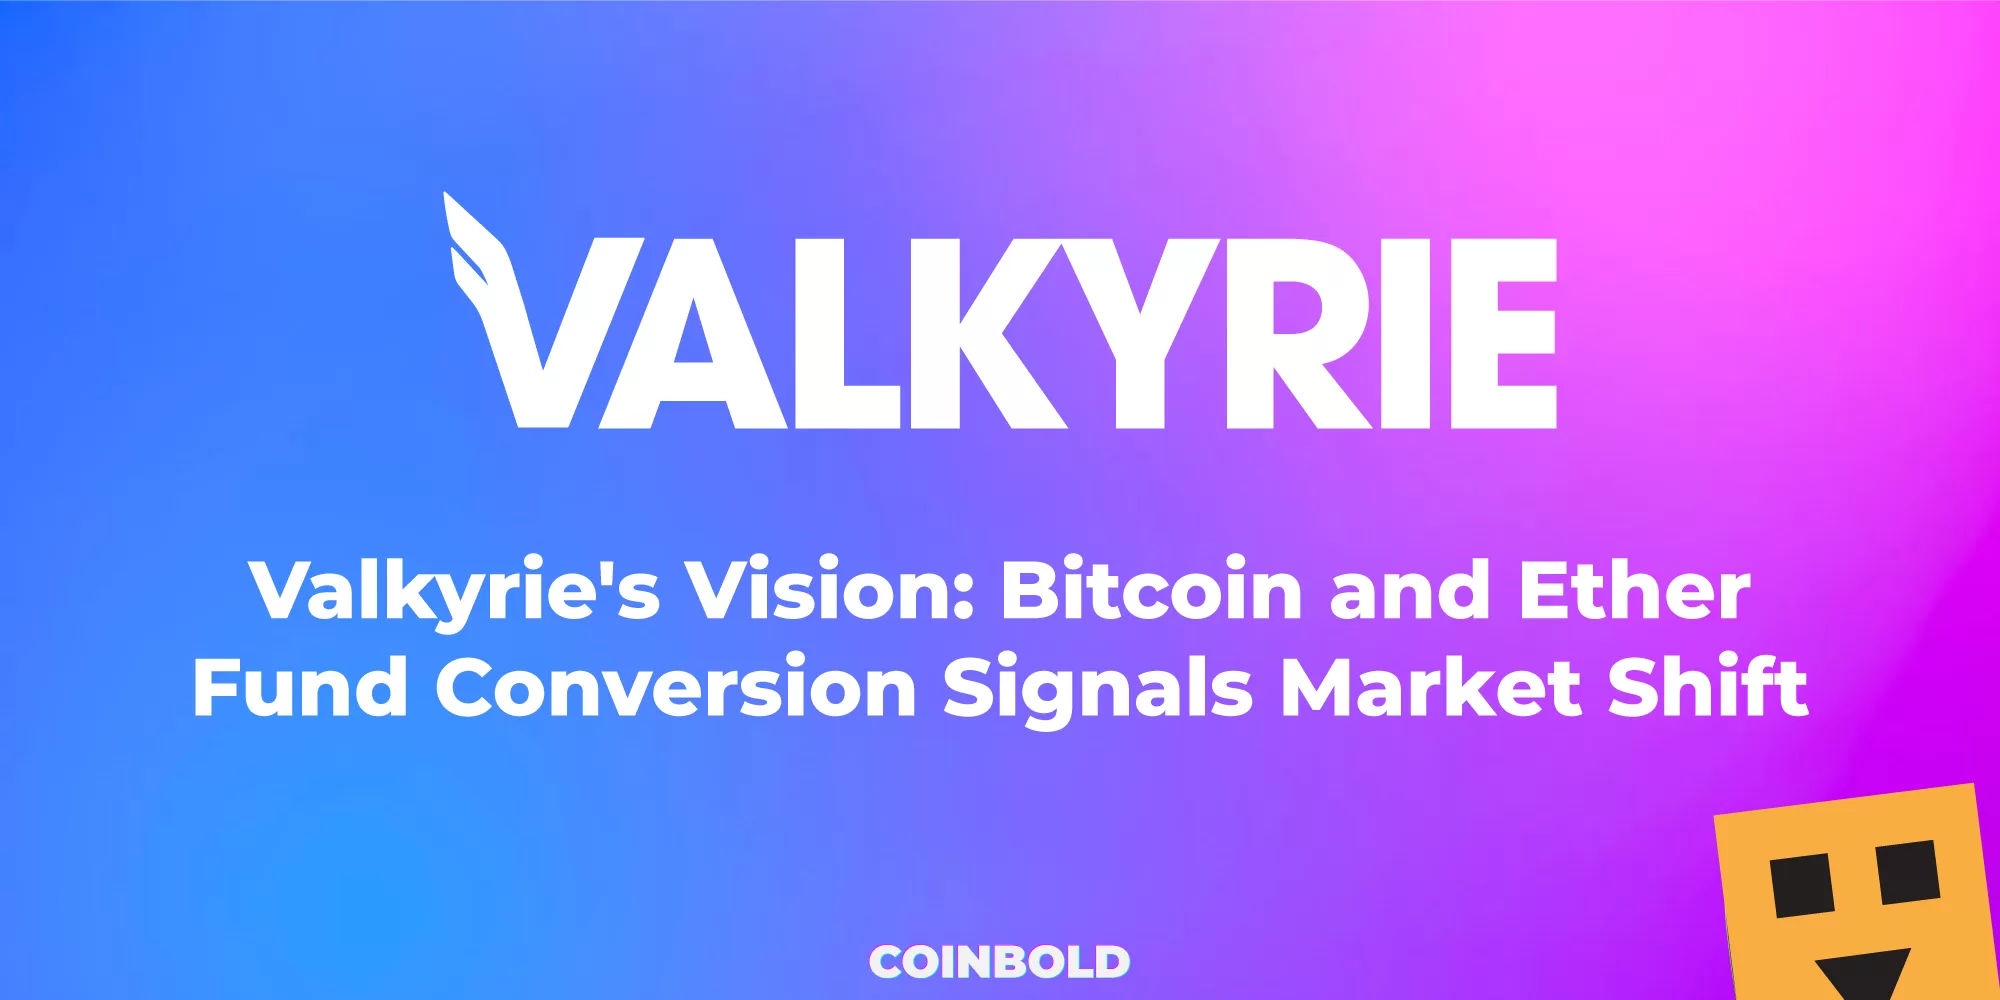 Valkyrie's Vision Bitcoin and Ether Fund Conversion Signals Market Shift